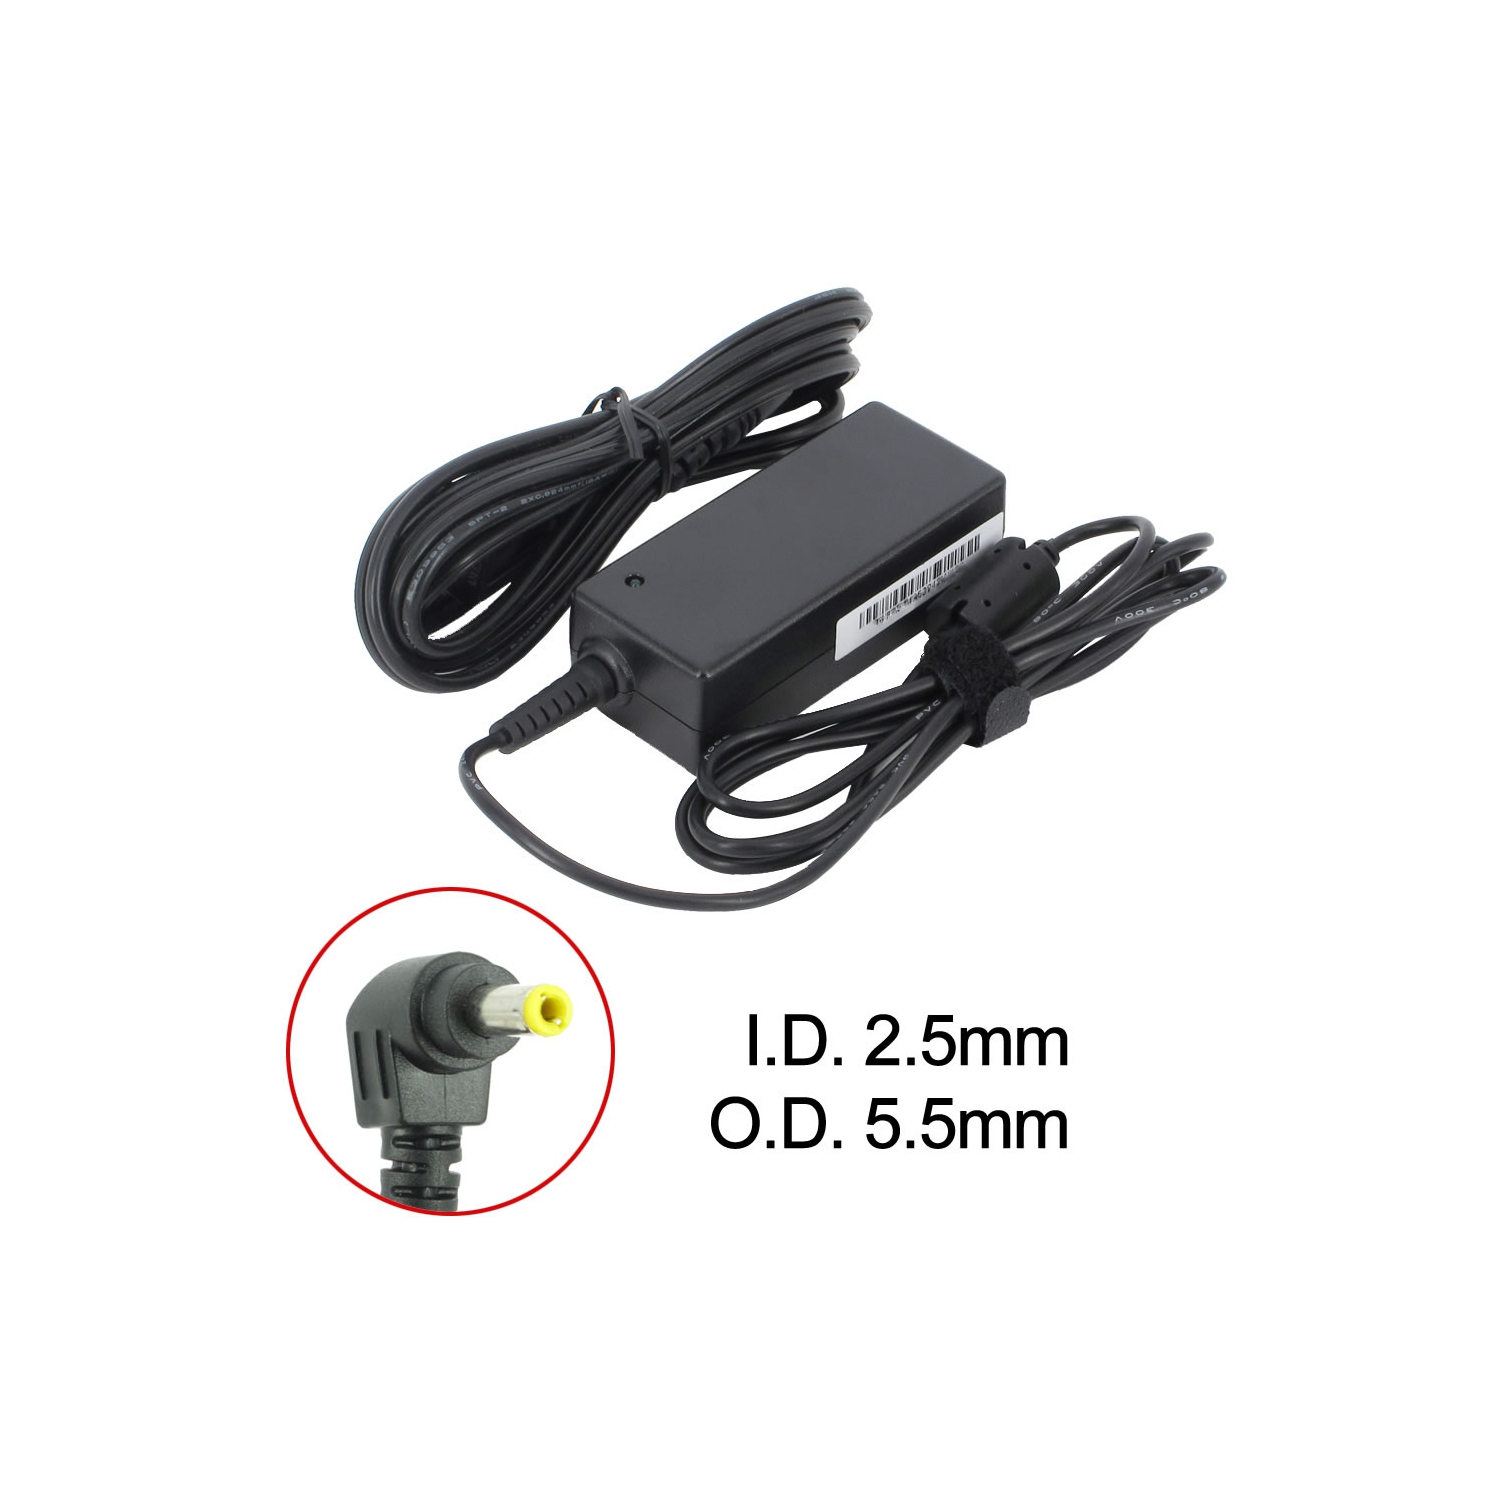 BattDepot: New Laptop AC Adapter for Lenovo 41R4450, ADP-40NH B, 31038046, 41R4447, 45K2201, 55Y9367, 57Y6367